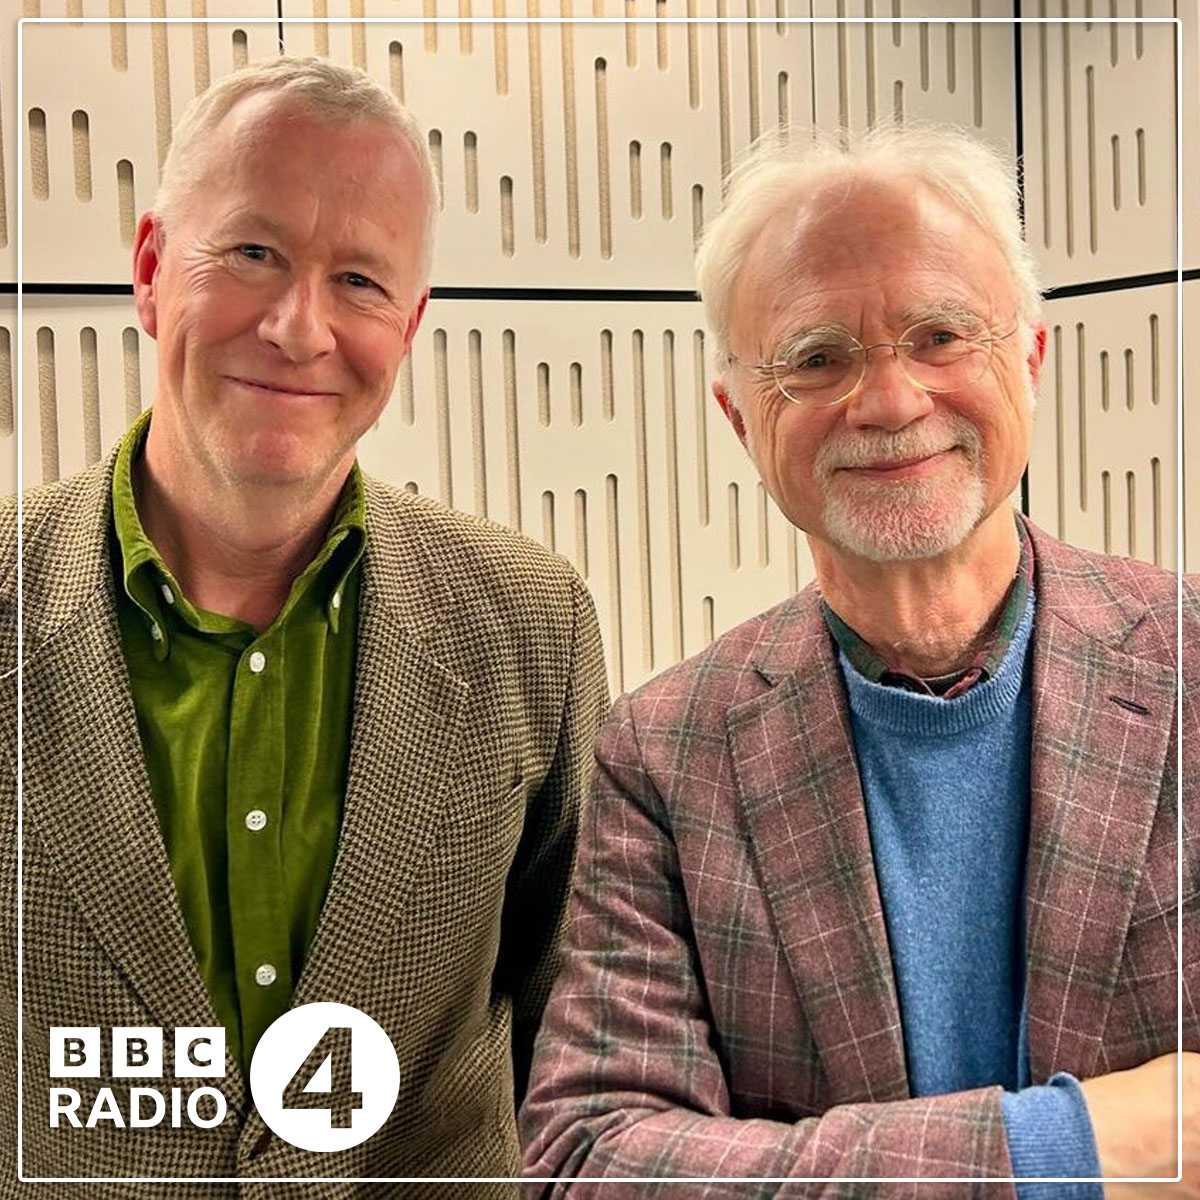 'John Adams is one of America's greatest and most performed living composers,' @BBCRadio4's 'This Cultural Life' host @JohnWilson14 says of his guest. Hear them discuss @HellTweet's life, work, the influence of Bernstein, Ellington, @SteveReich, and more: nonesuch.com/journal/listen…